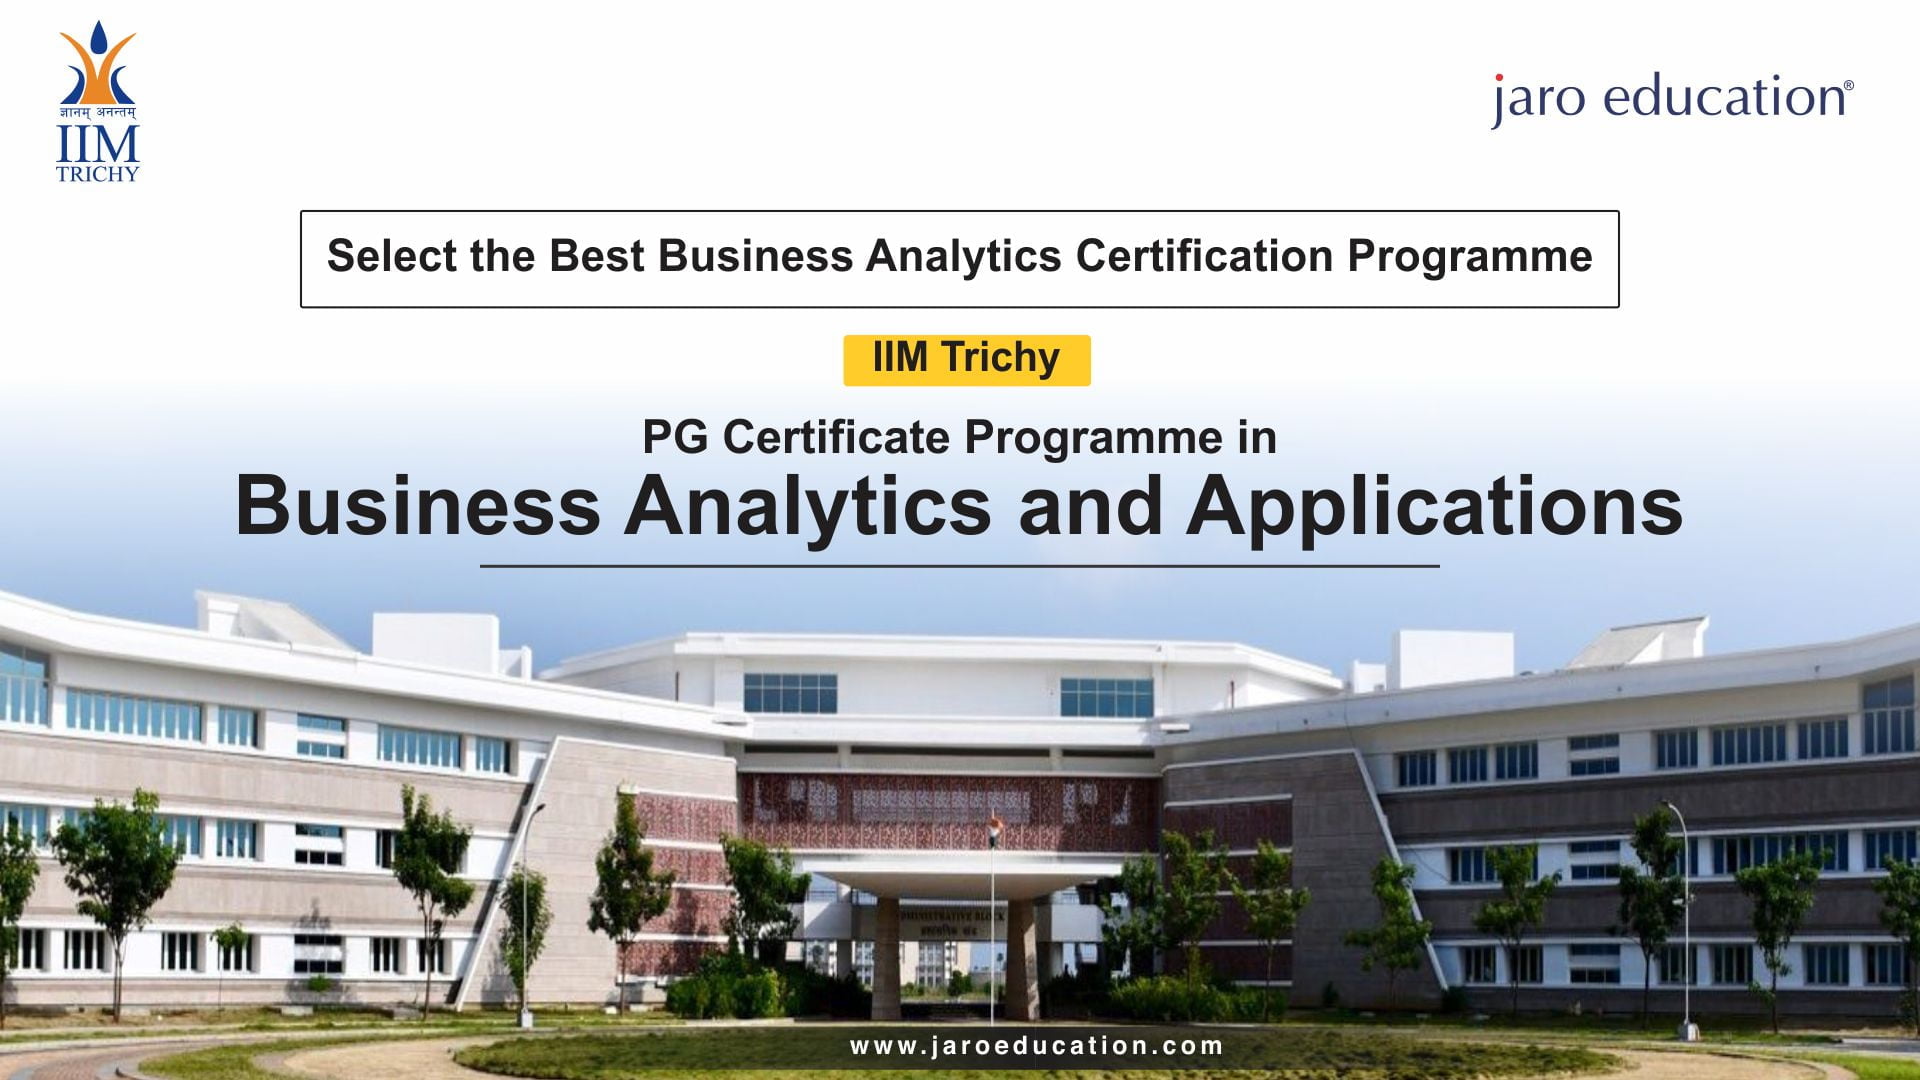 Select the best business analytics certification programme